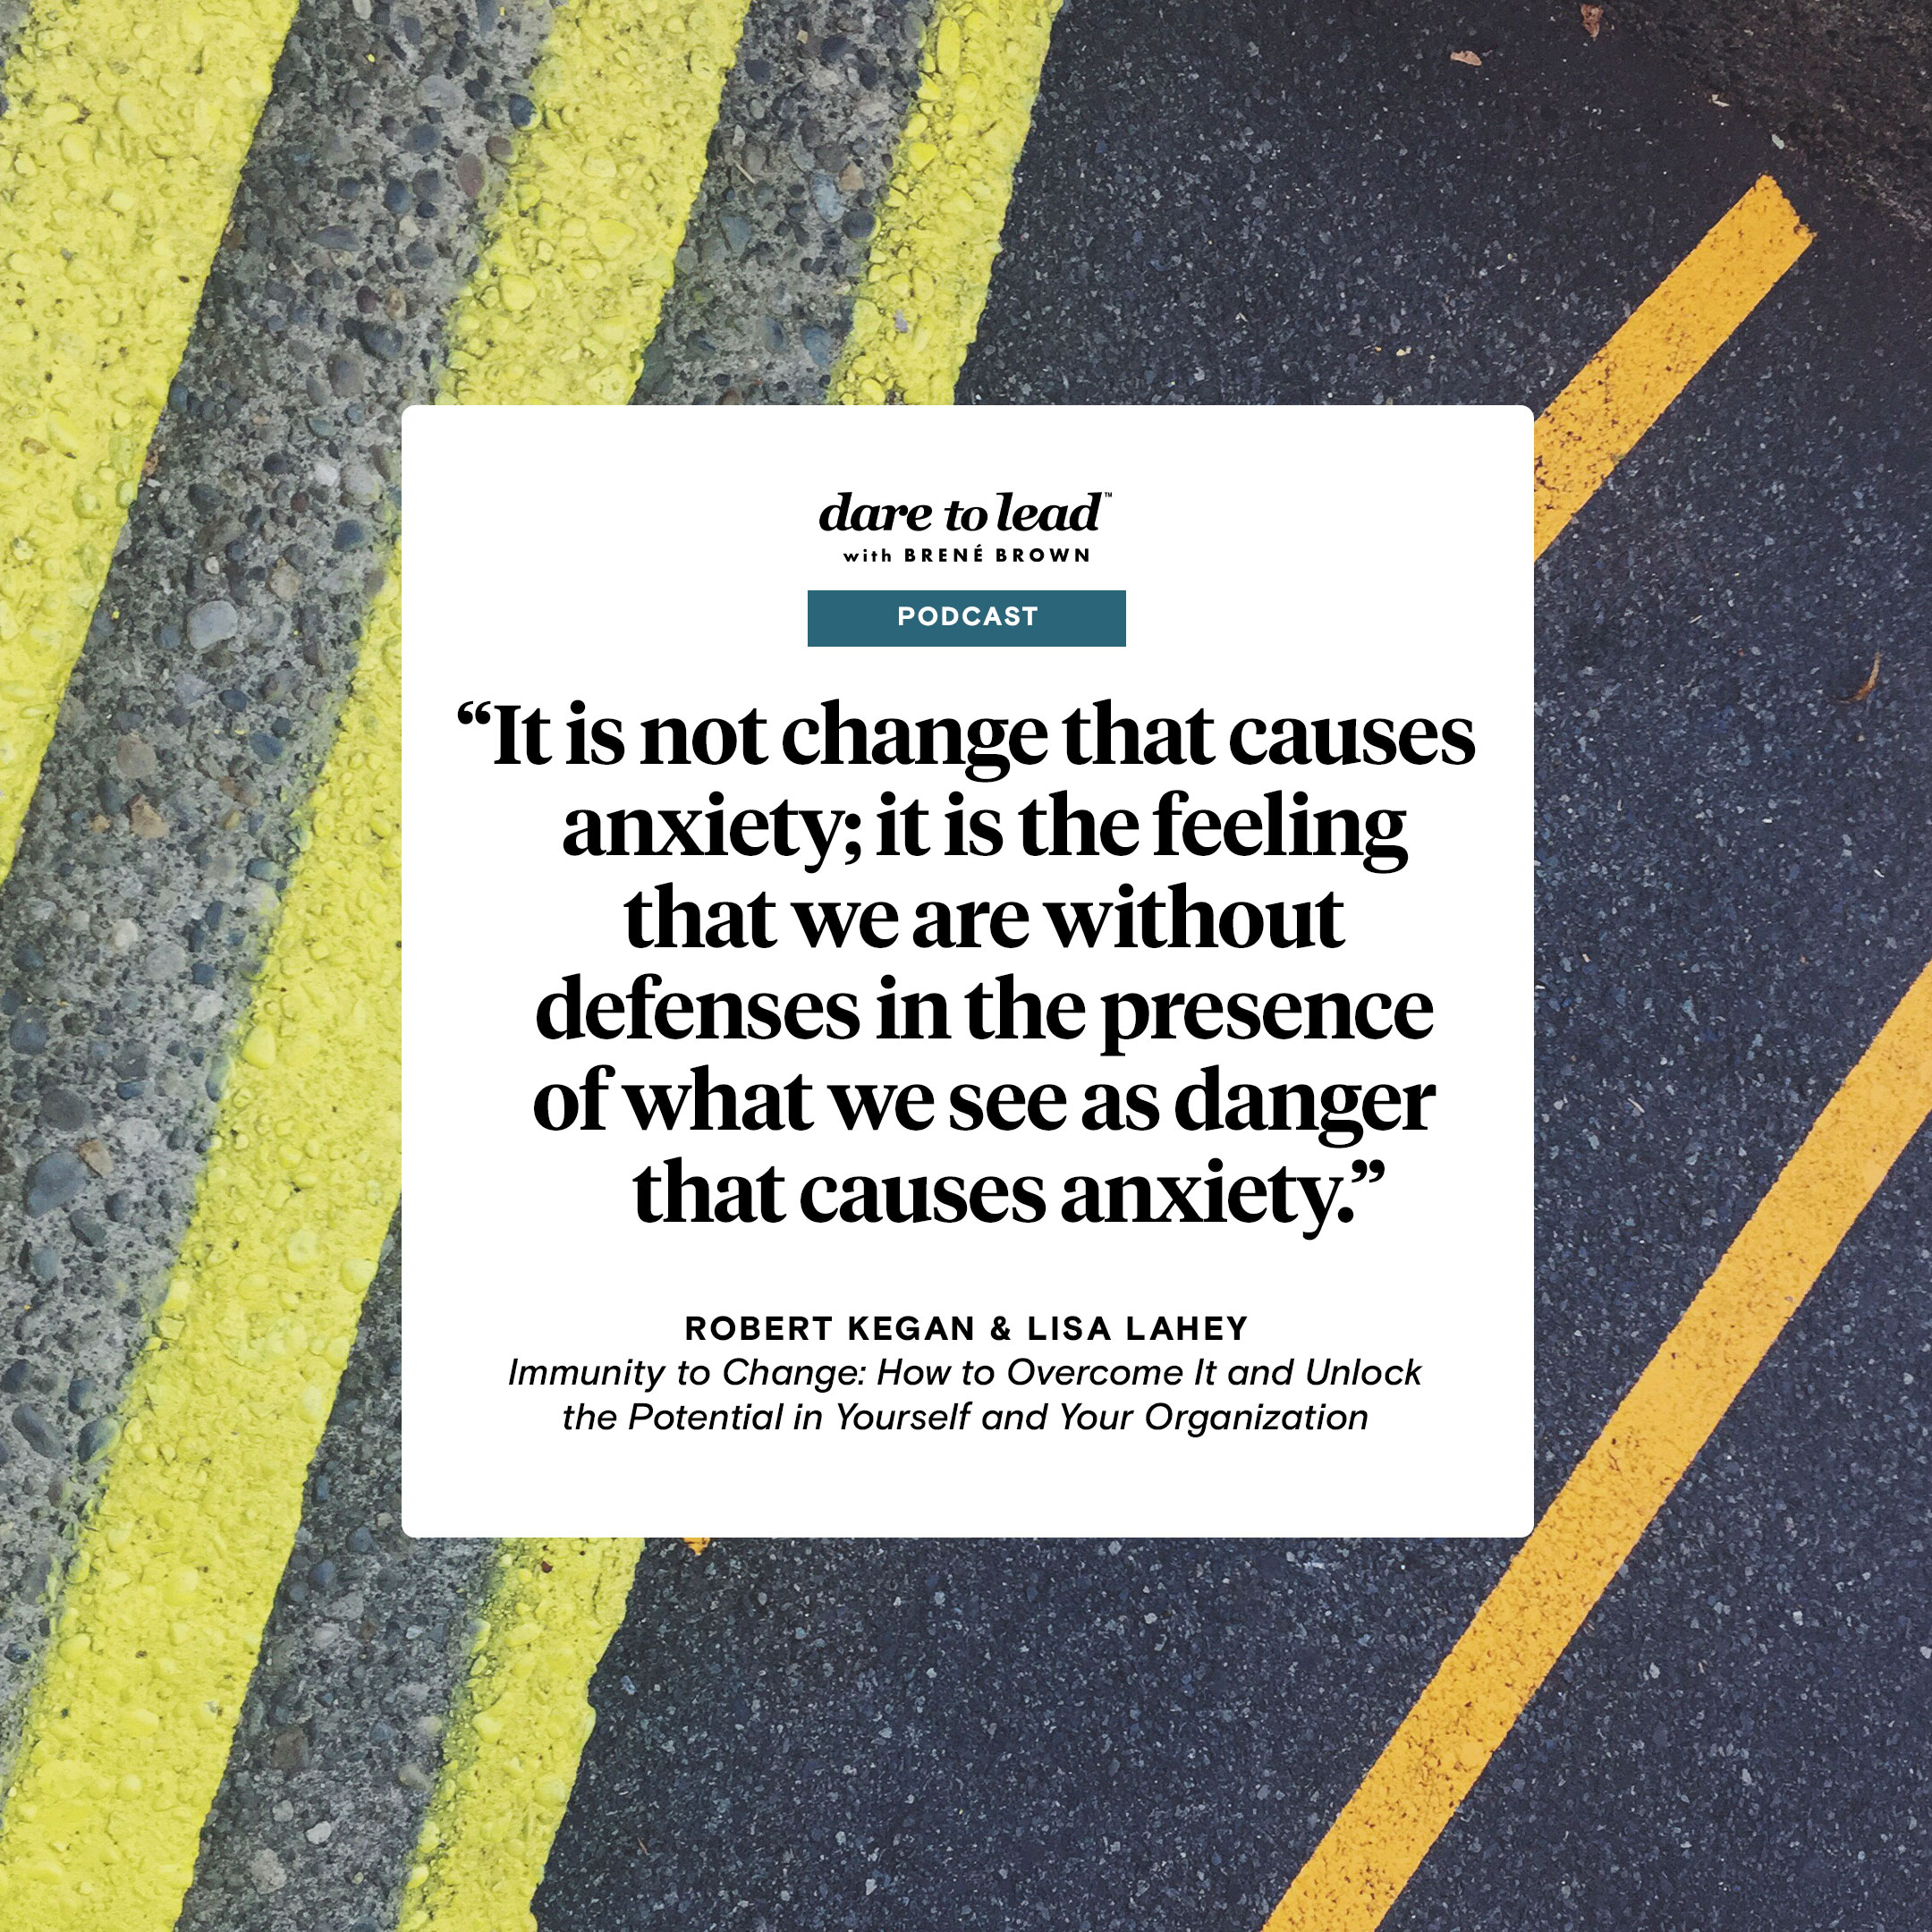 A quote from Immunity to Change, by Robert Kegan and Lisa Lahey: It is not change that causes anxiety; it is the feeling that we are without defenses in the presence of what we see as danger that causes anxiety.